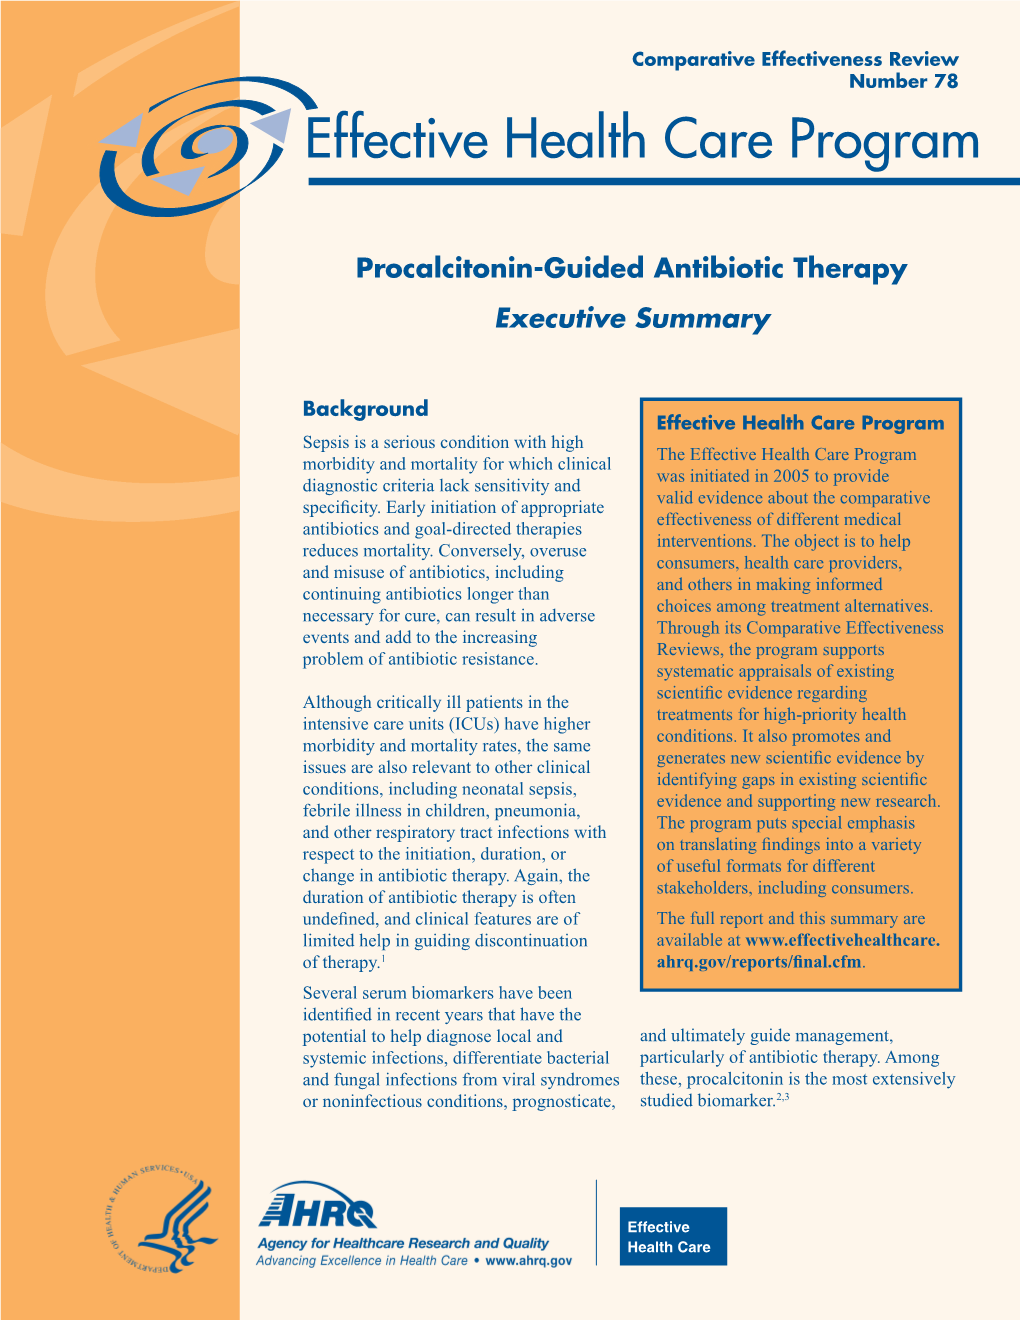 Procalcitonin-Guided Antibiotic Therapy Executive Summary